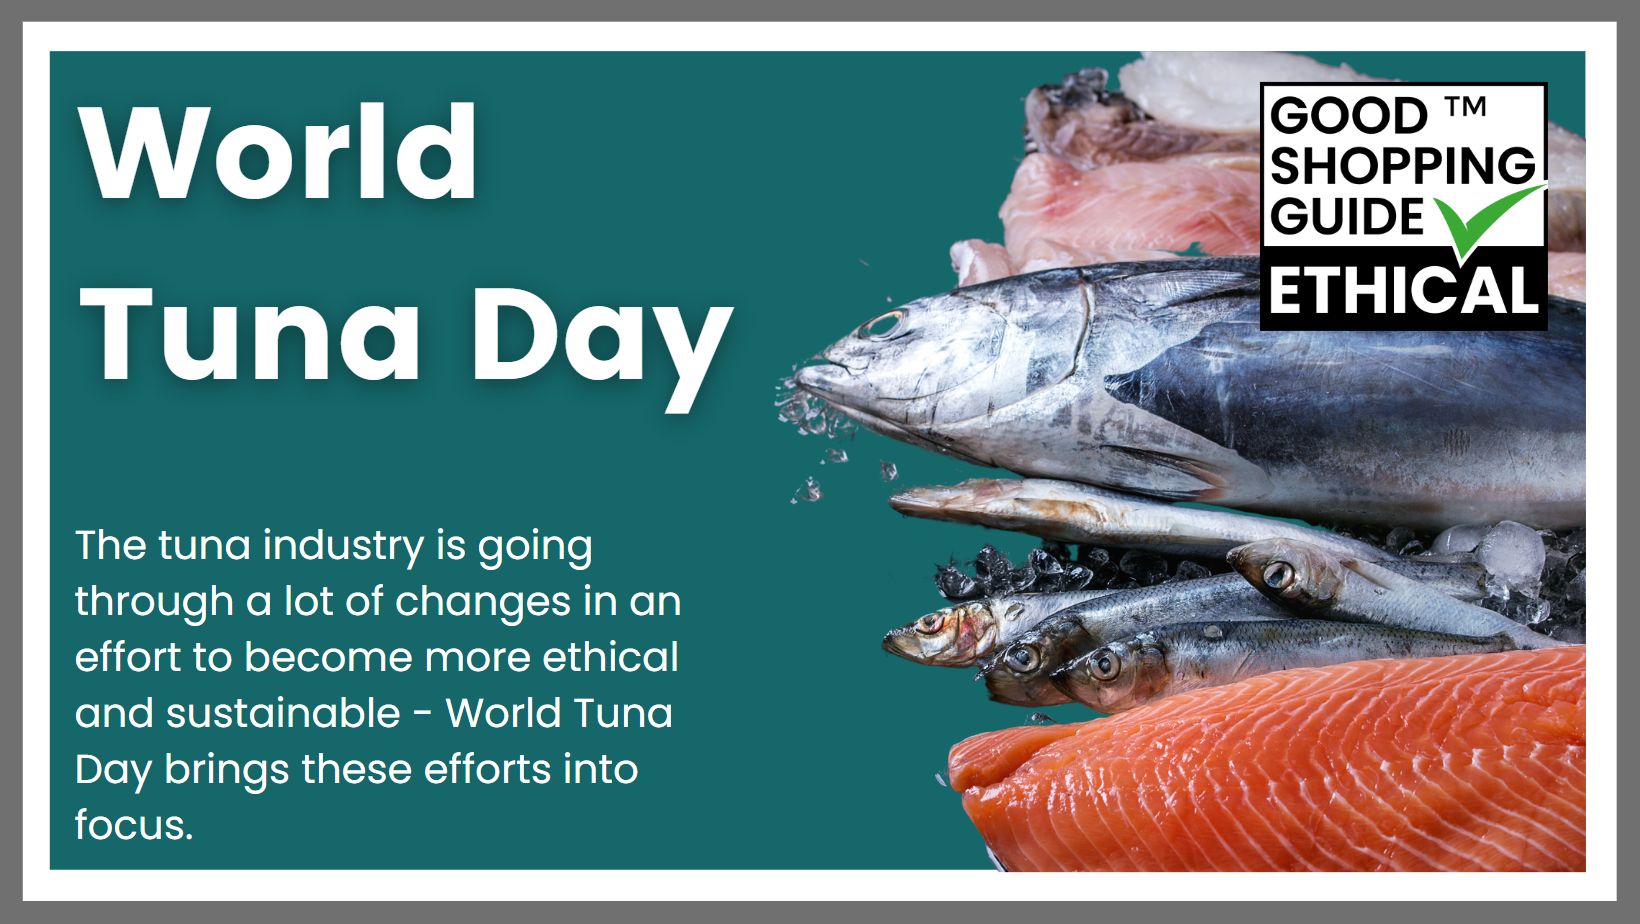 It's World Tuna Day! The UN event aims to promote sustainable